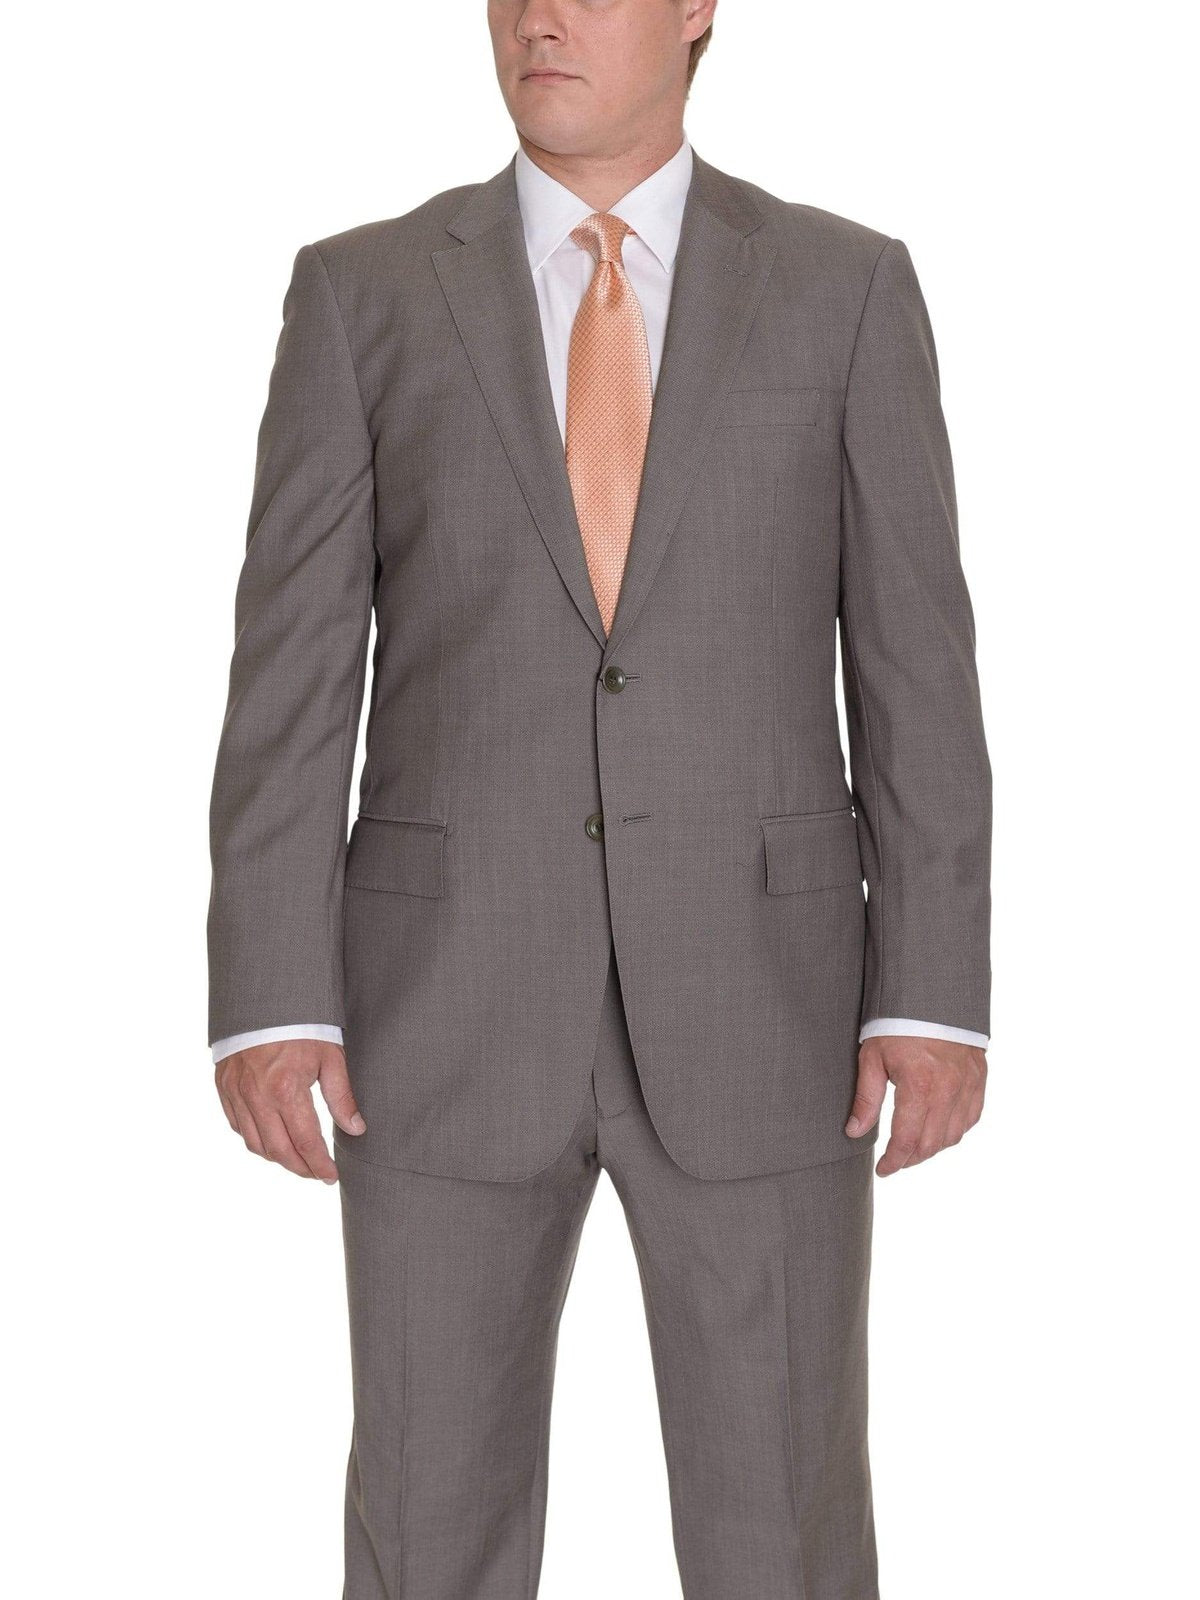 Label E Sale Suits 36S Modern Fit Solid Taupe Two Button Wool Suit